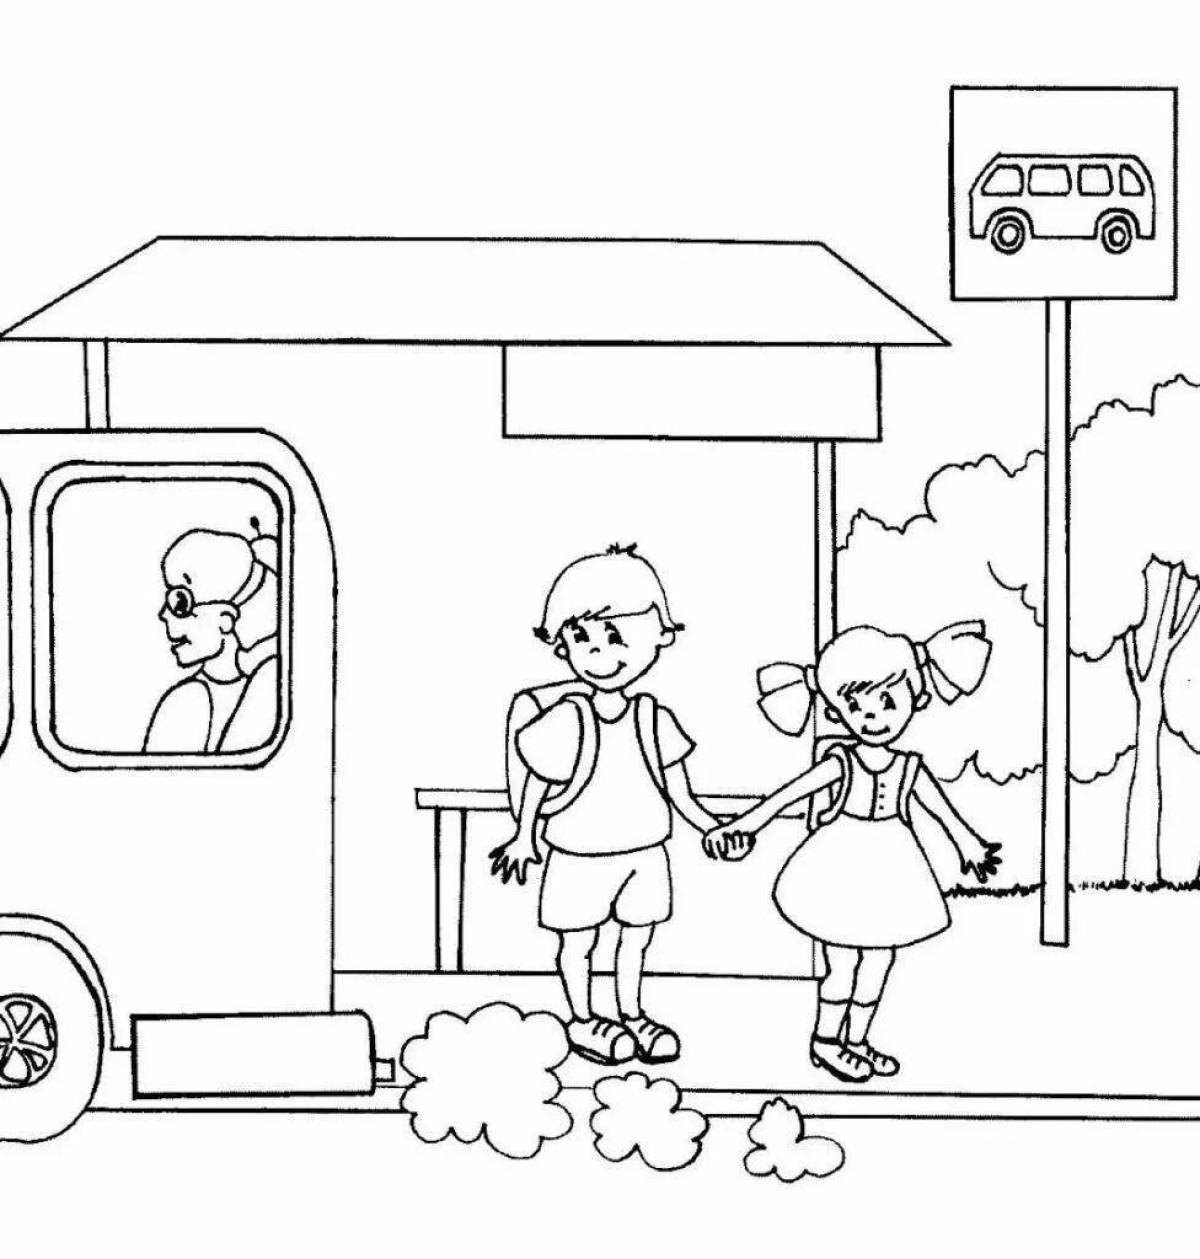 Entertaining traffic rules coloring for grade 2